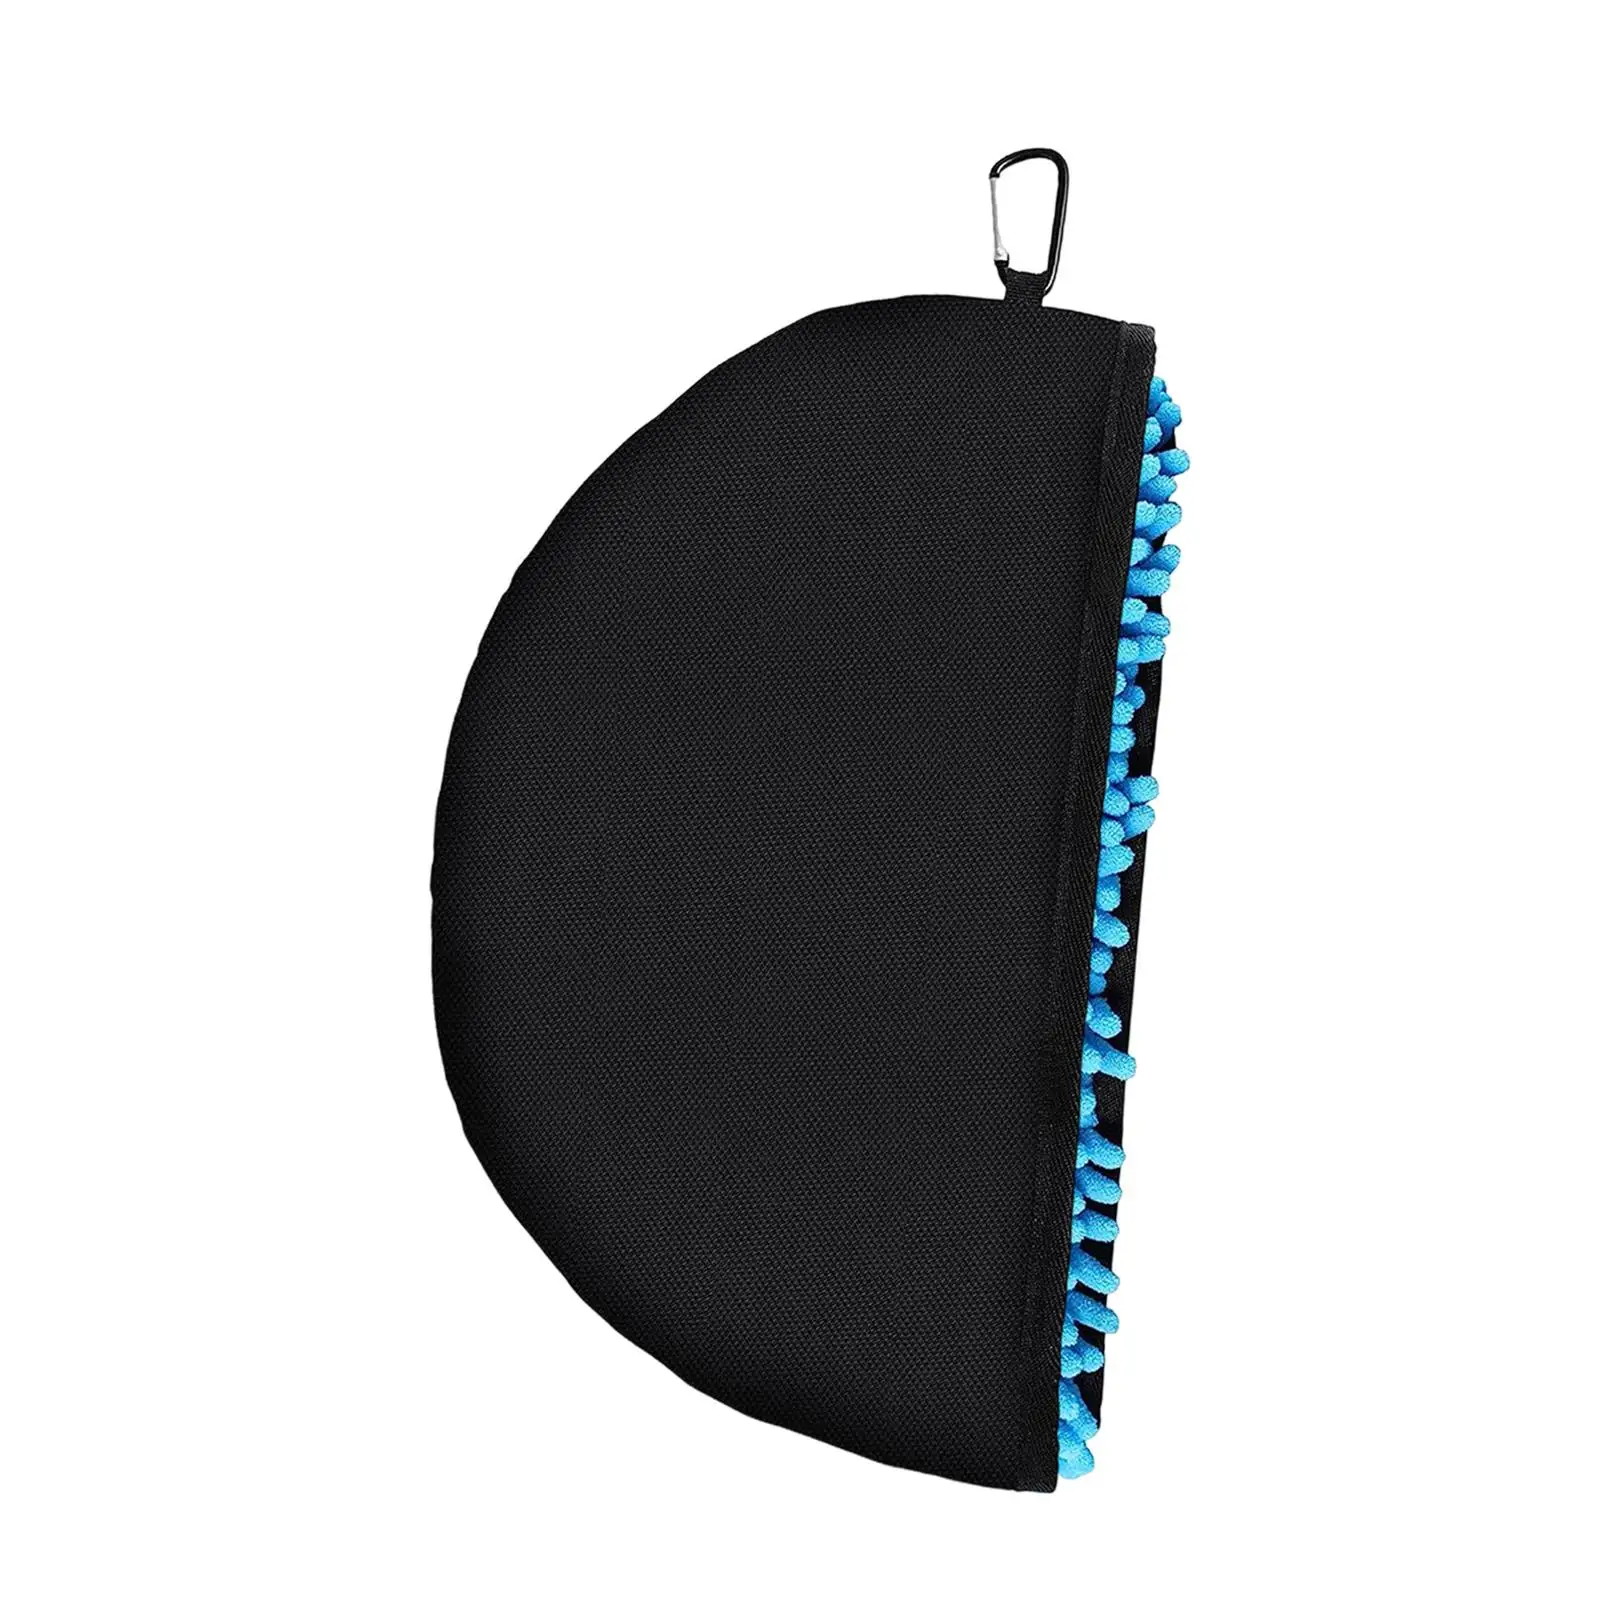 Disc Golf Cleaning Tool Disc Golf Bag Target Accessories Tote Cleaning Towel Case for Golf Course Travel Outdoor Beginner Sports